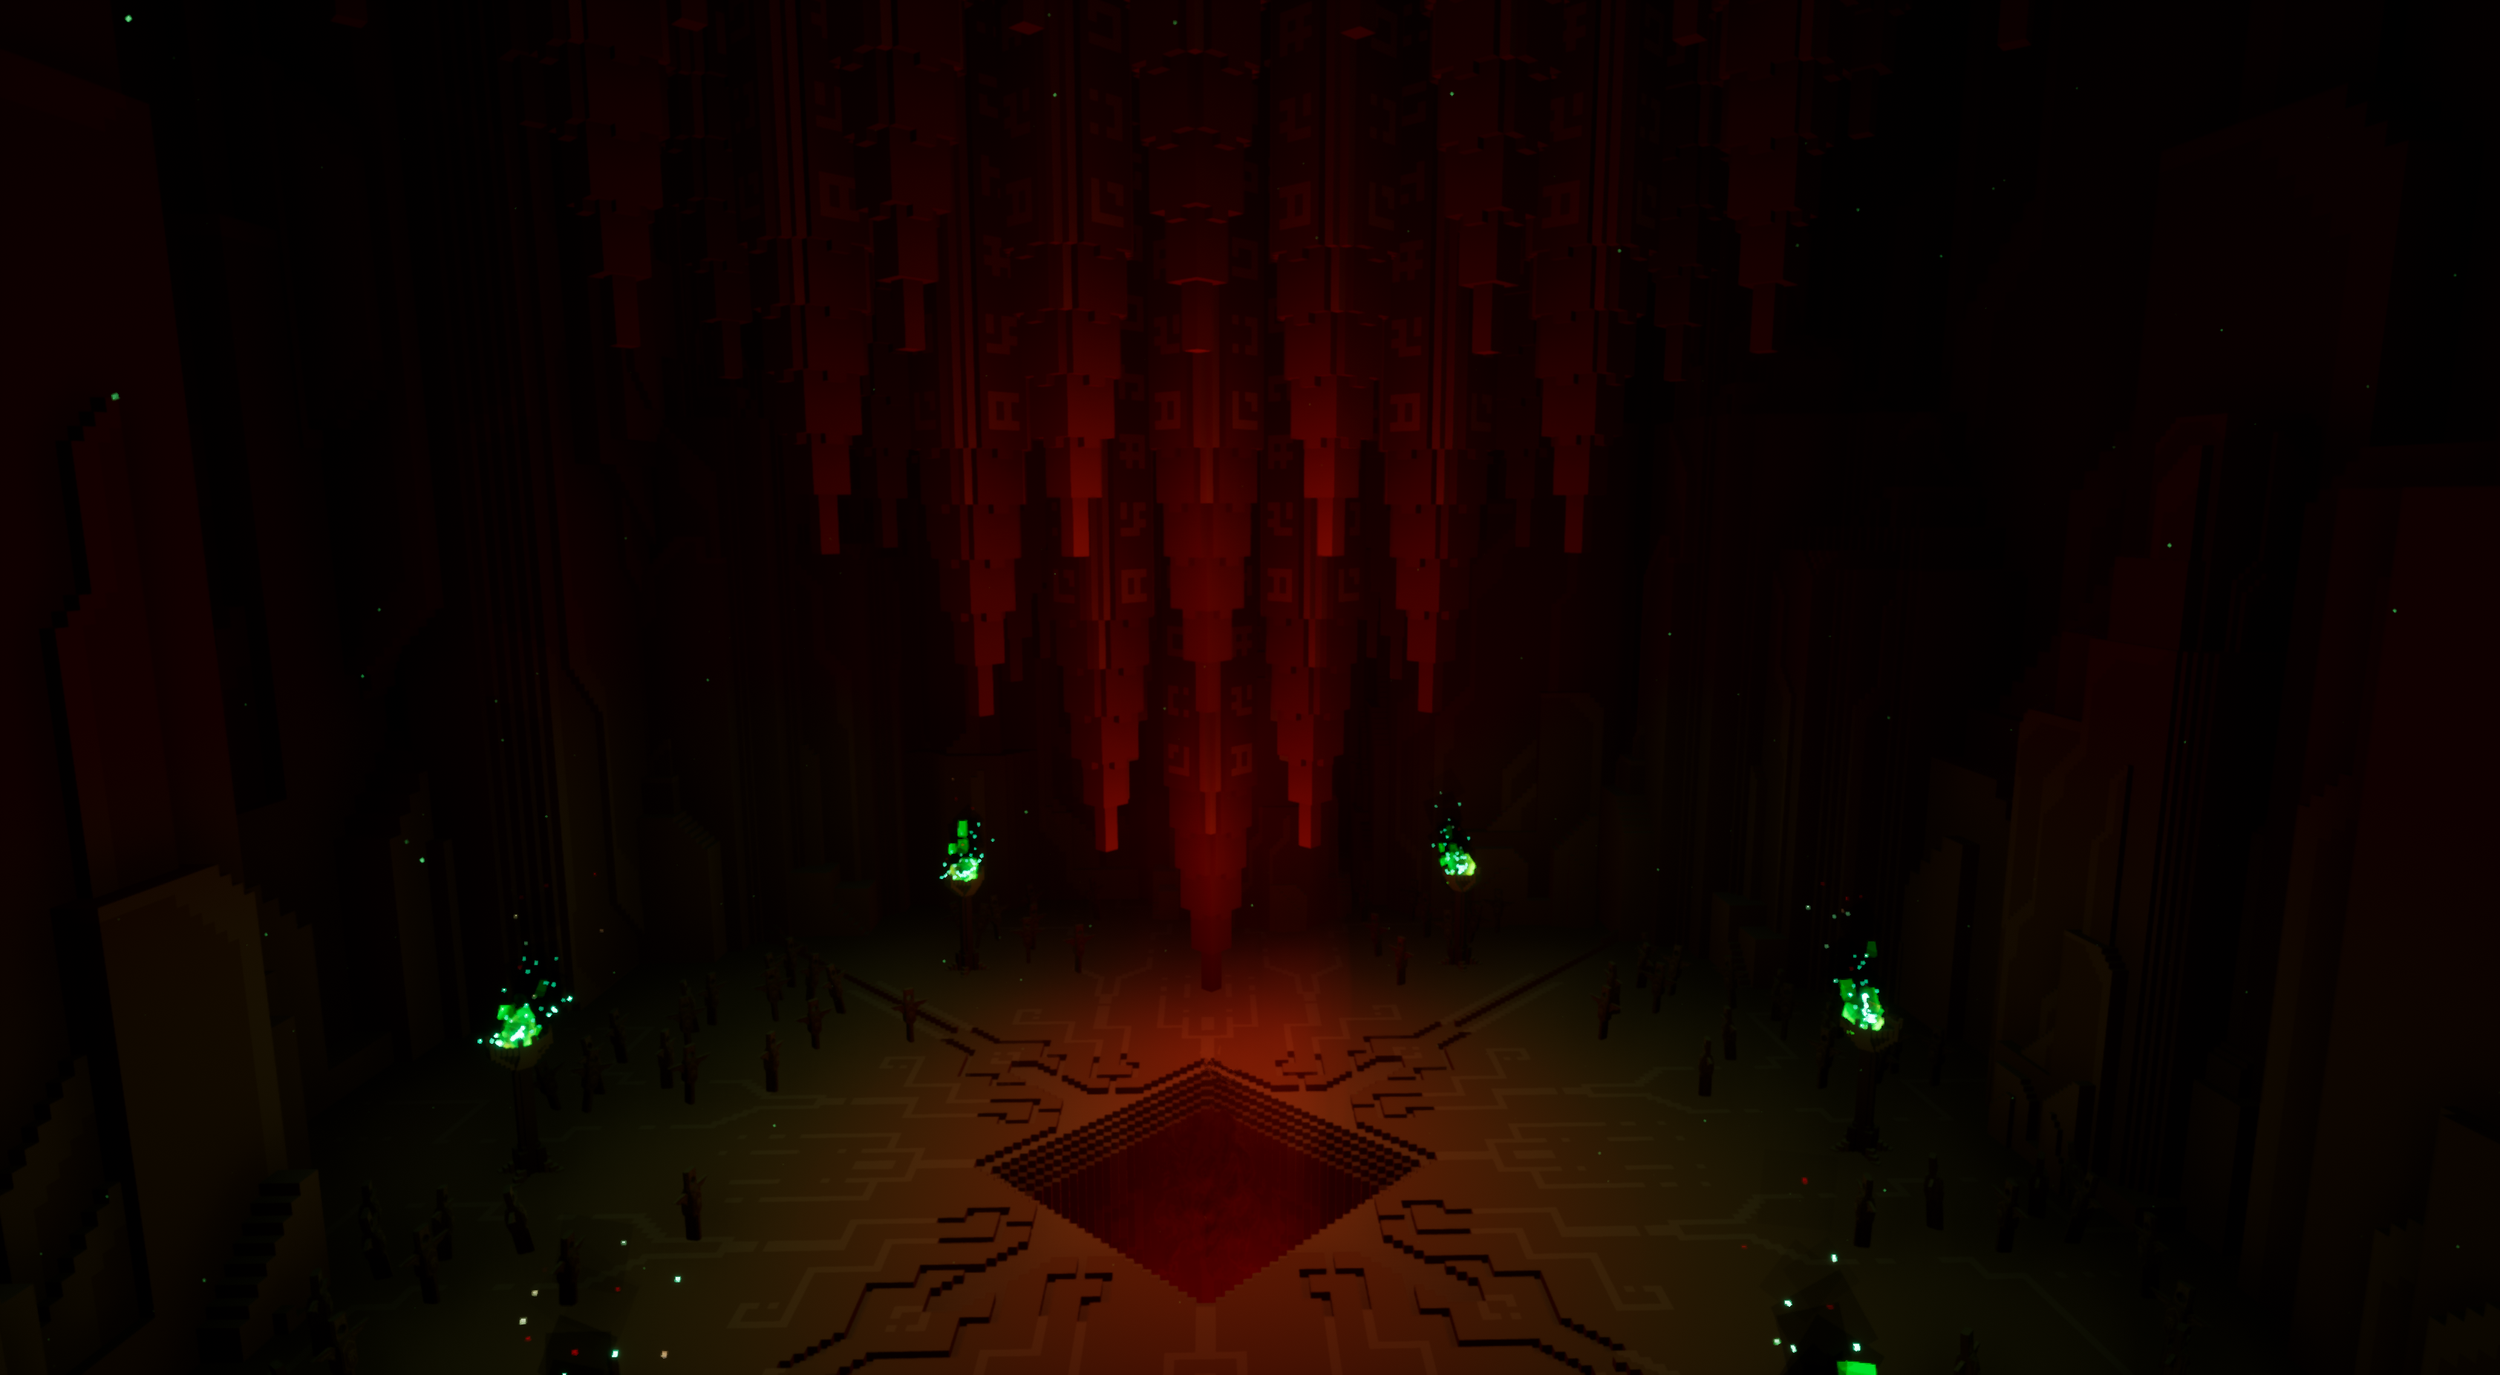  Later, we see these obelisks hung above a forbidden cavern, being used as some kind of sacred seal. 